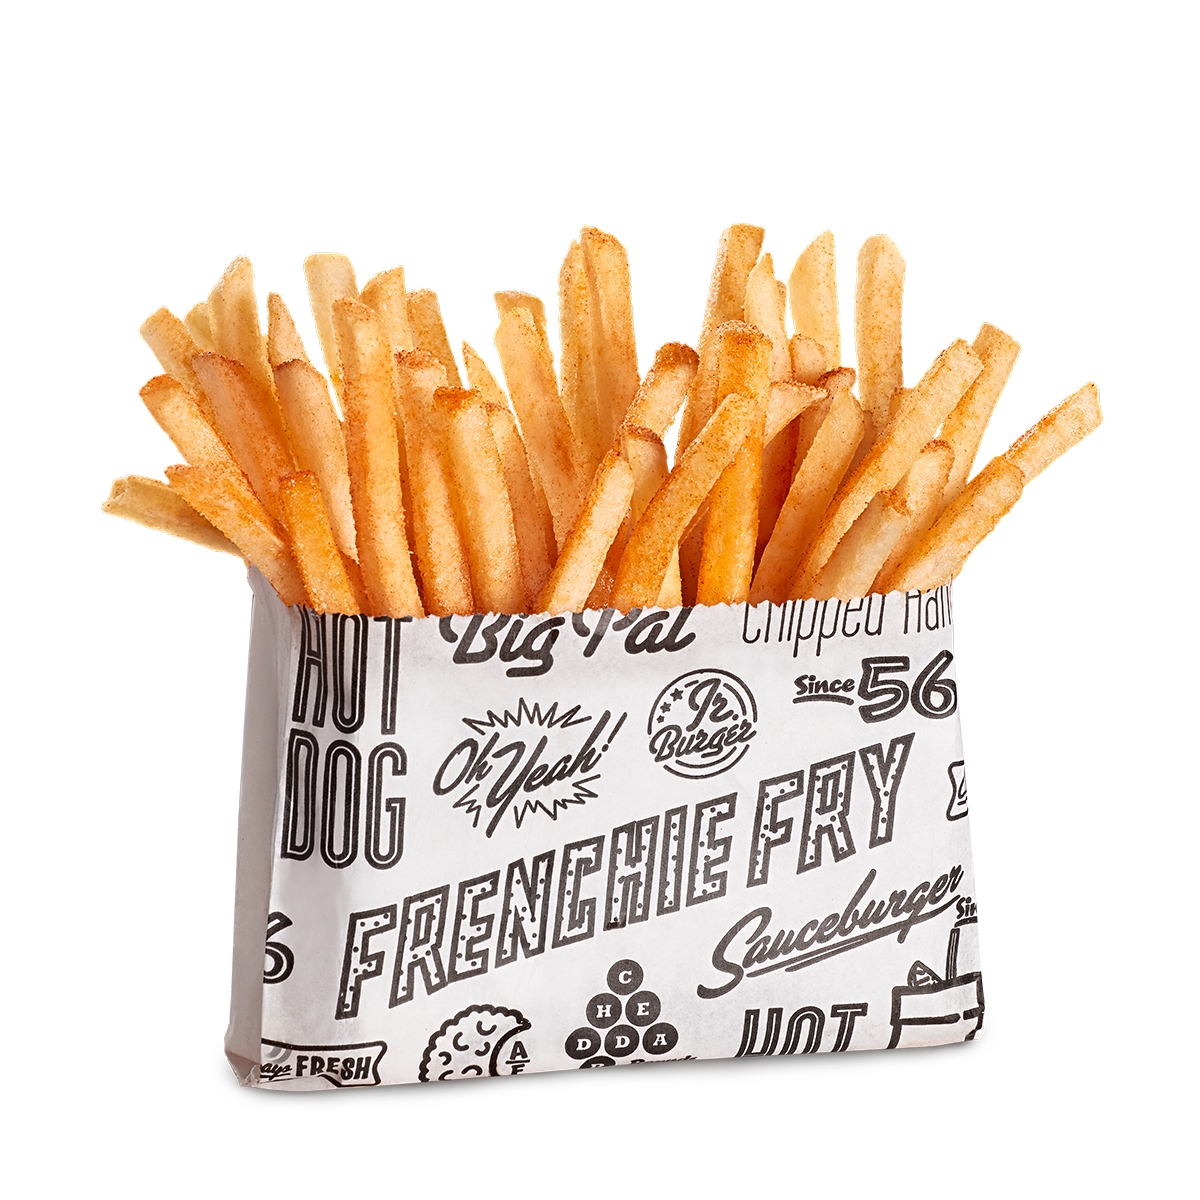 Frenchie Fry